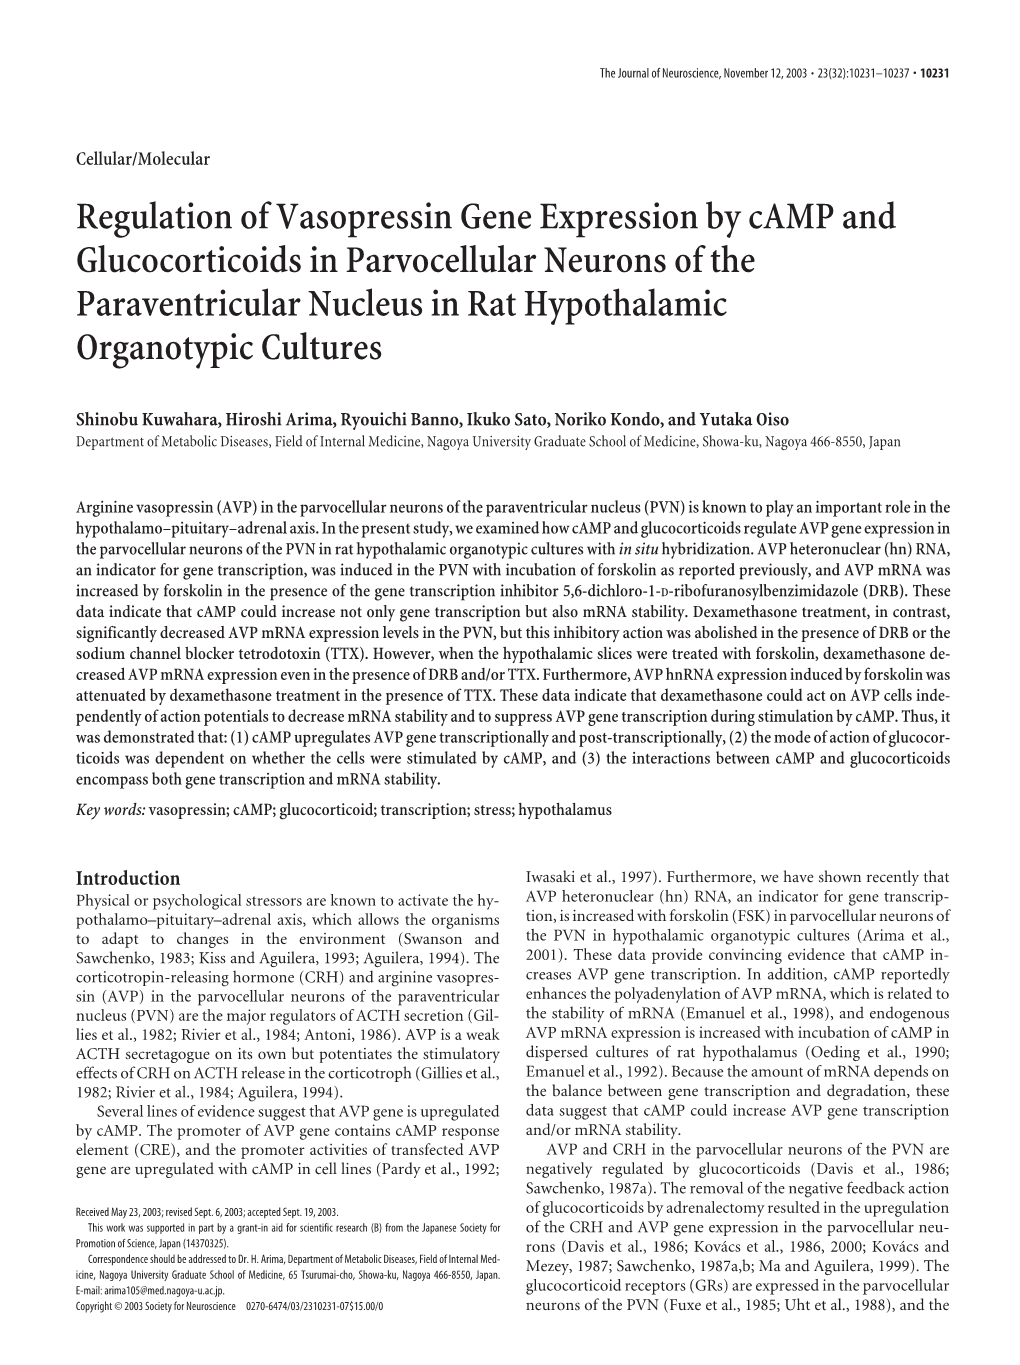 Regulation of Vasopressin Gene Expression by Camp and Glucocorticoids in Parvocellular Neurons of the Paraventricular Nucleus in Rat Hypothalamic Organotypic Cultures